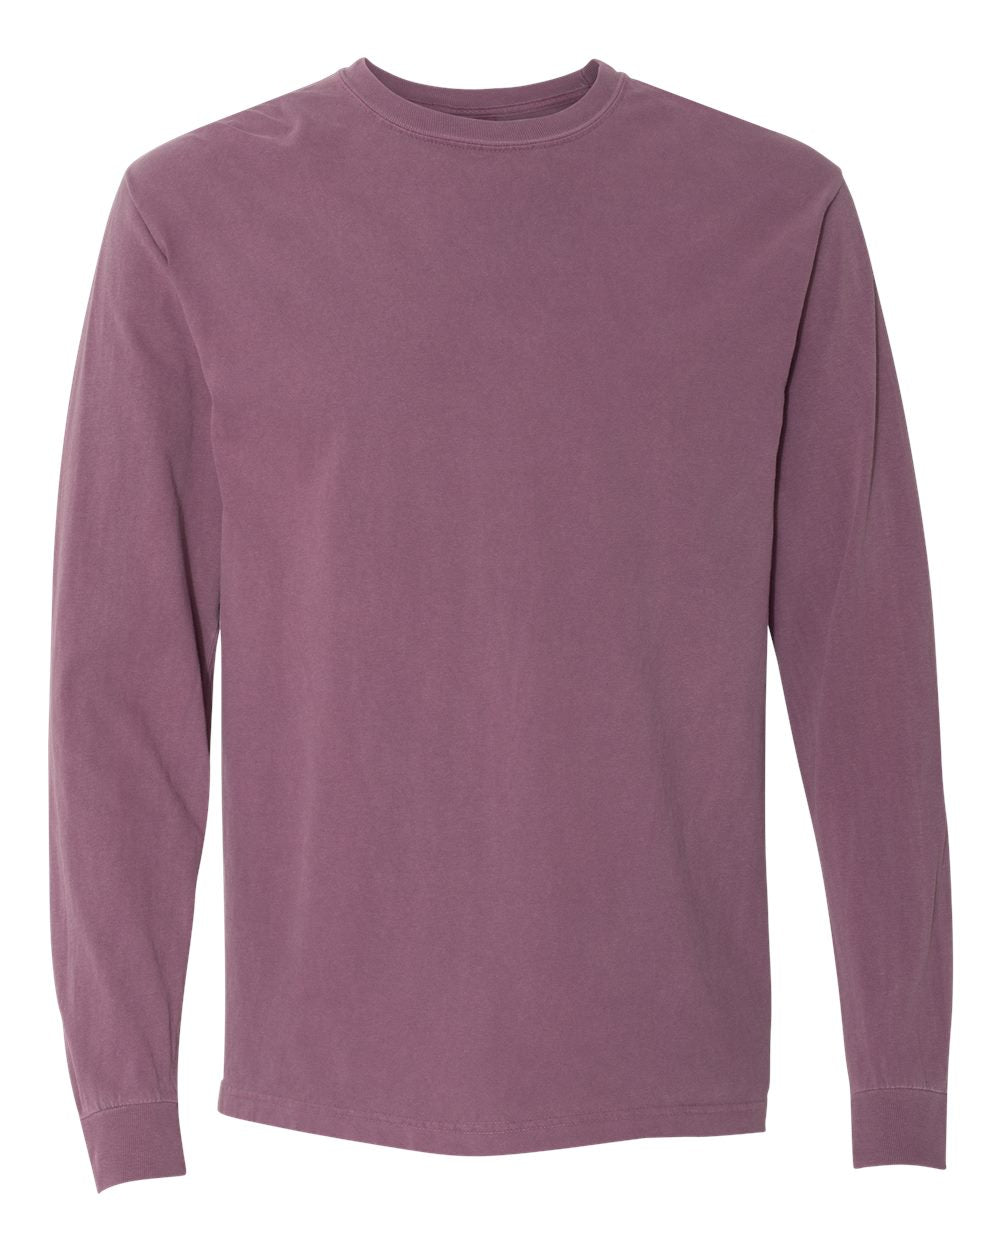 Comfort Colors Garment-Dyed Heavyweight Long Sleeve T-Shirt 6014 #color_Berry